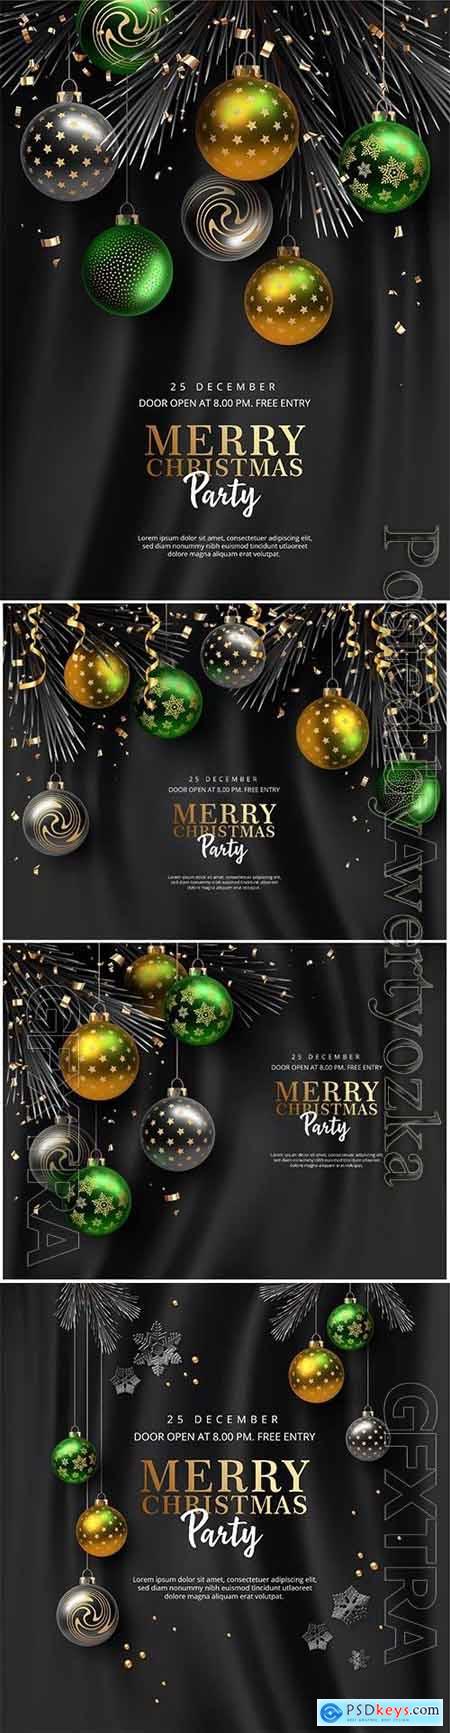 Christmas and new year party vector poster